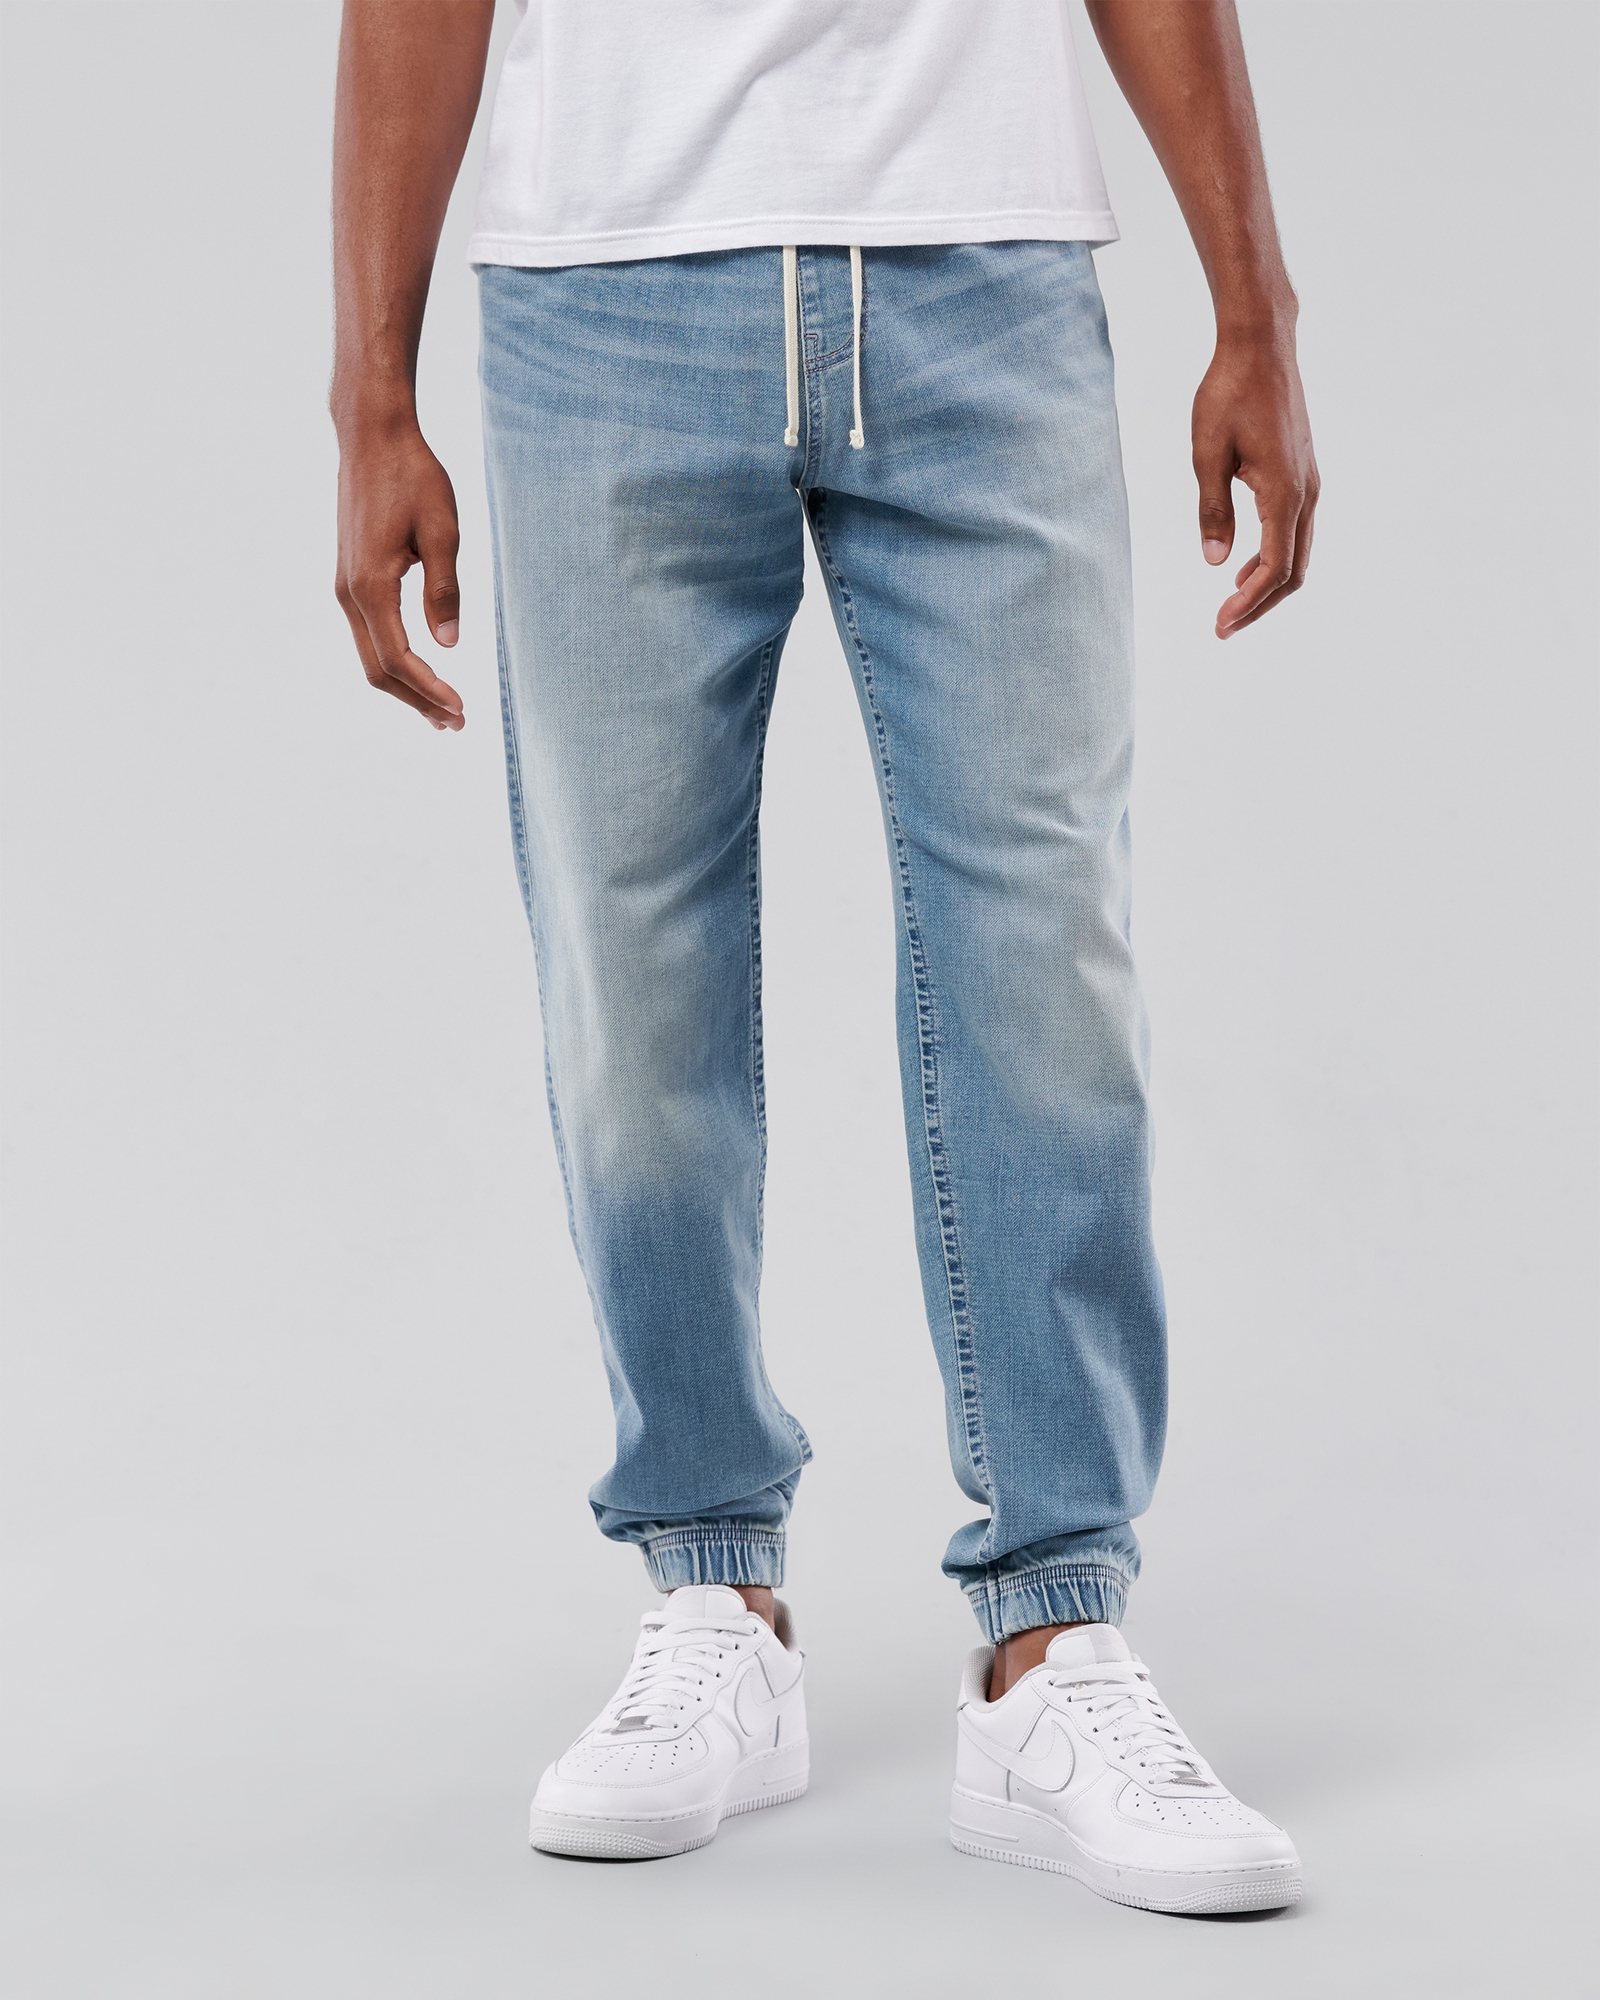 https://img.hollisterco.com/is/image/anf/KIC_331-1614-2568-296_model1.jpg?policy=product-extra-large